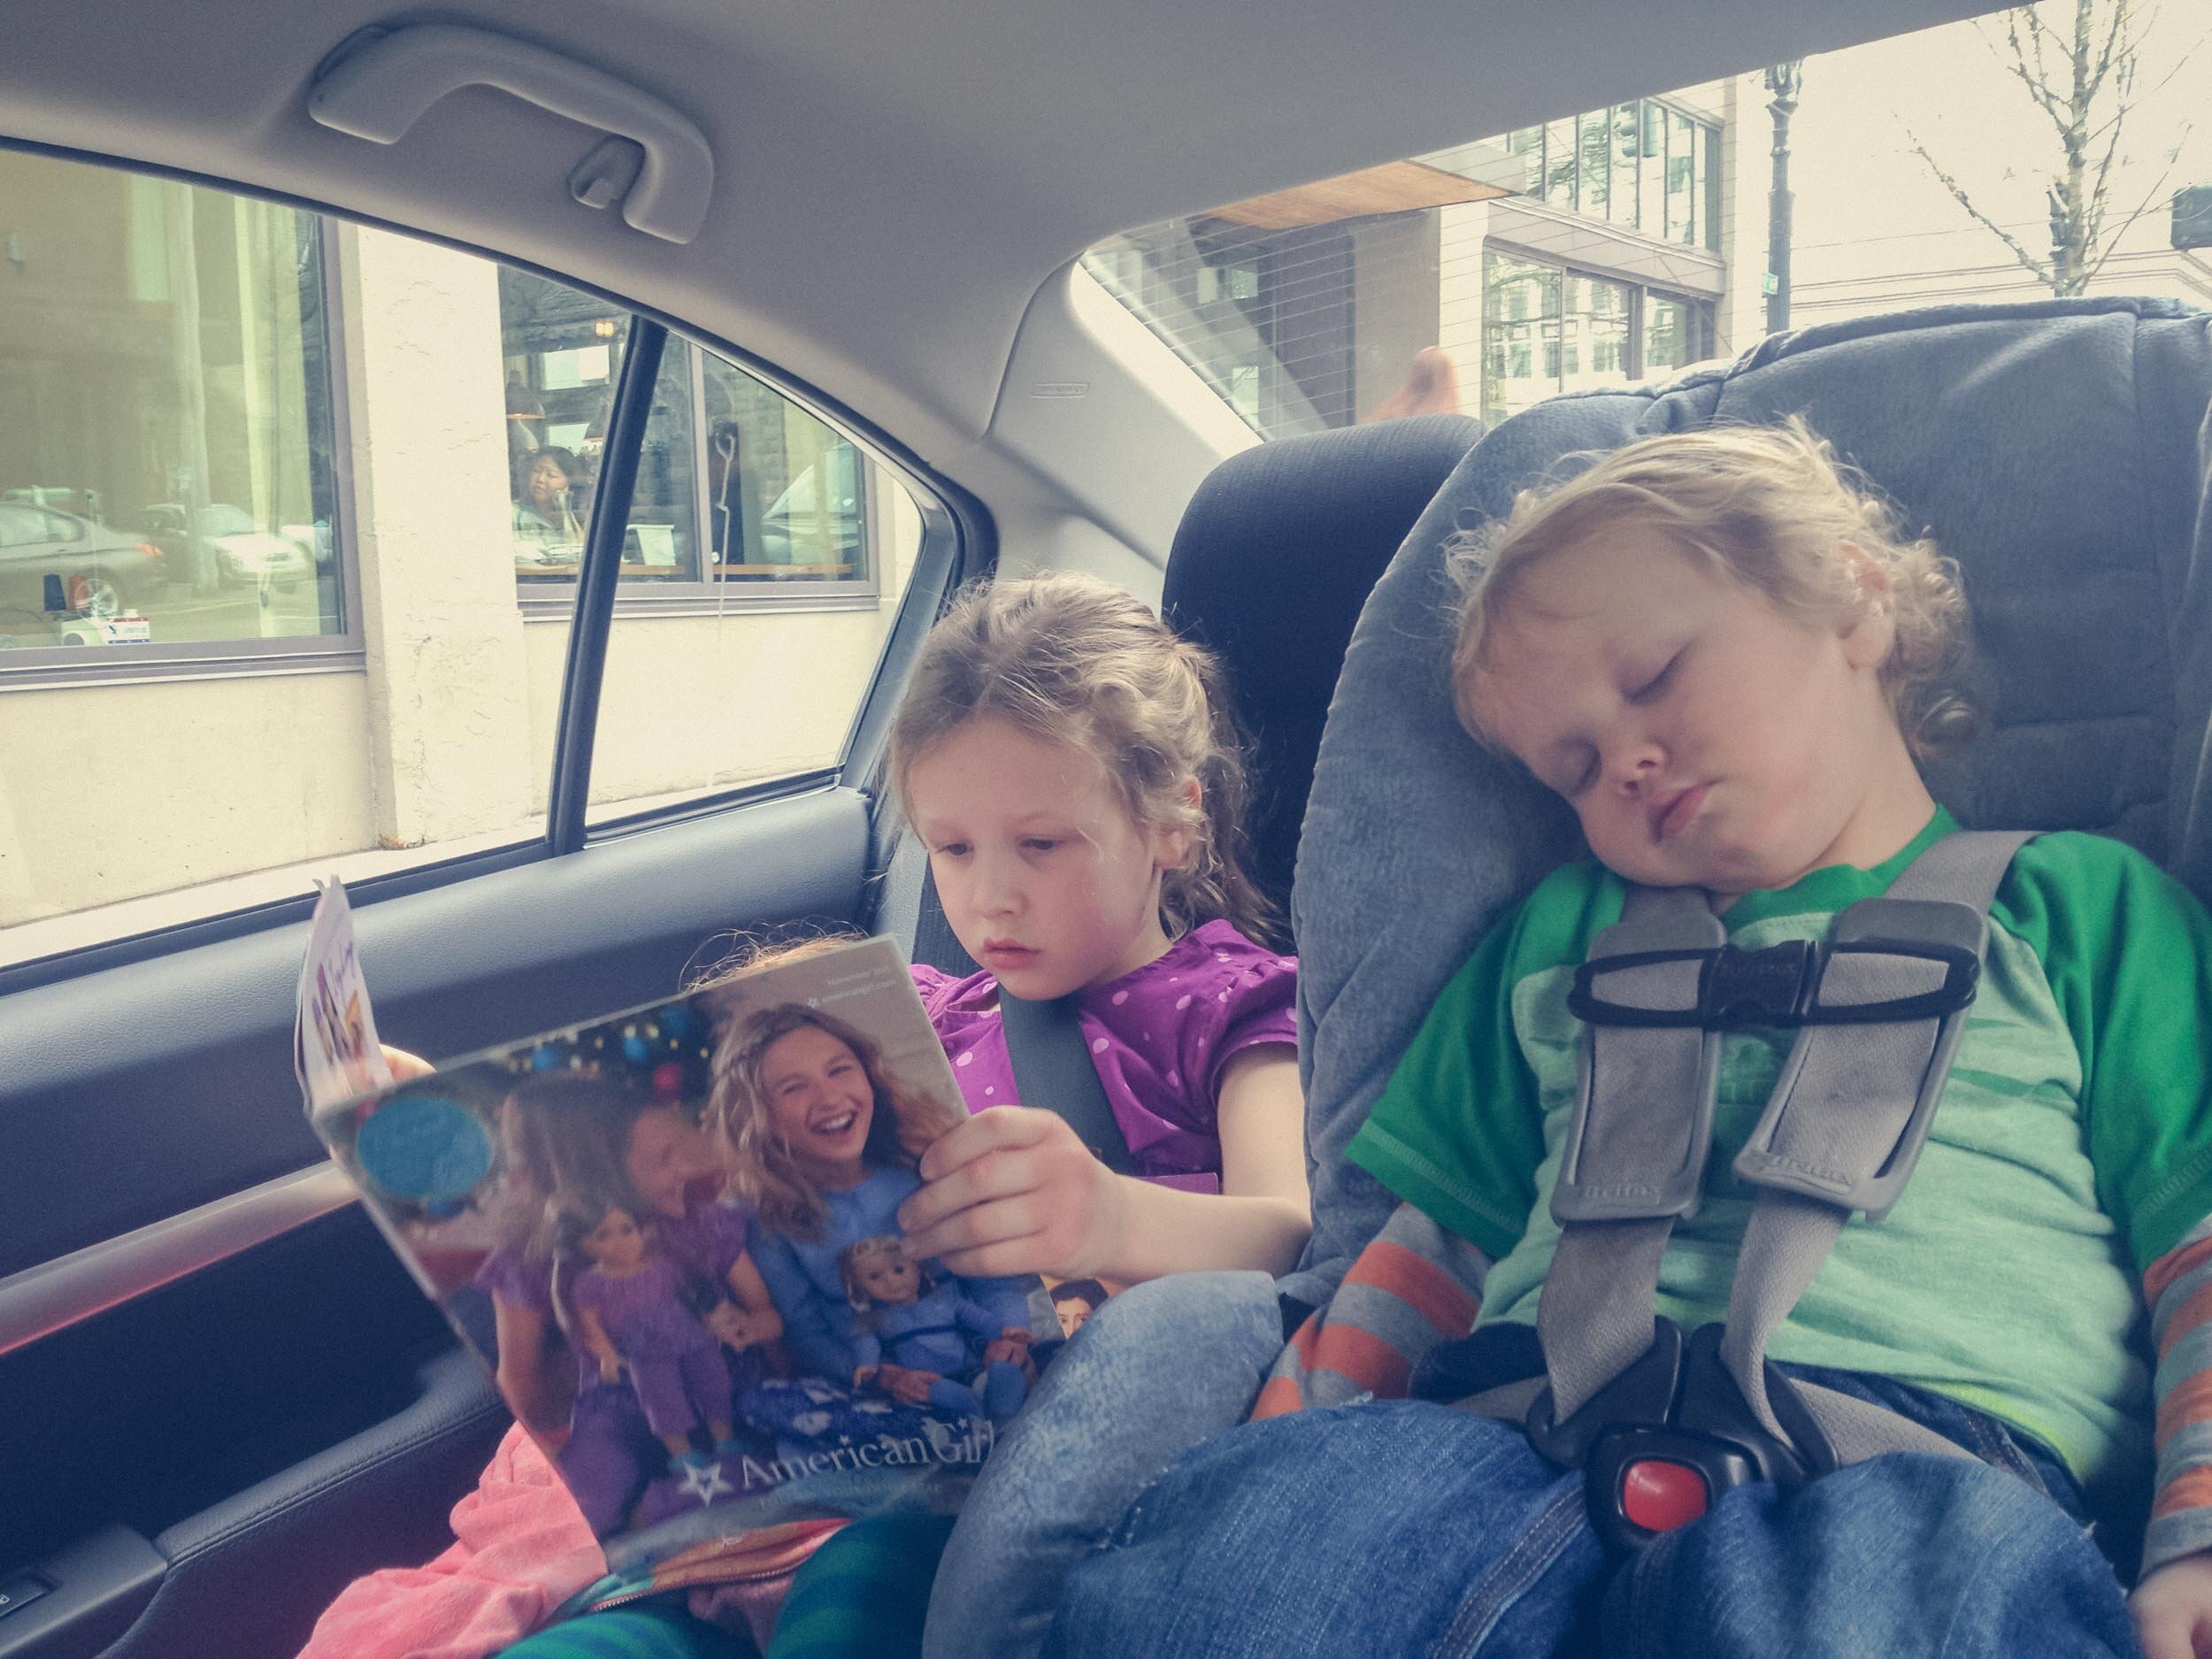 Girl reading American Girl magazine in car while little brother sleeps.